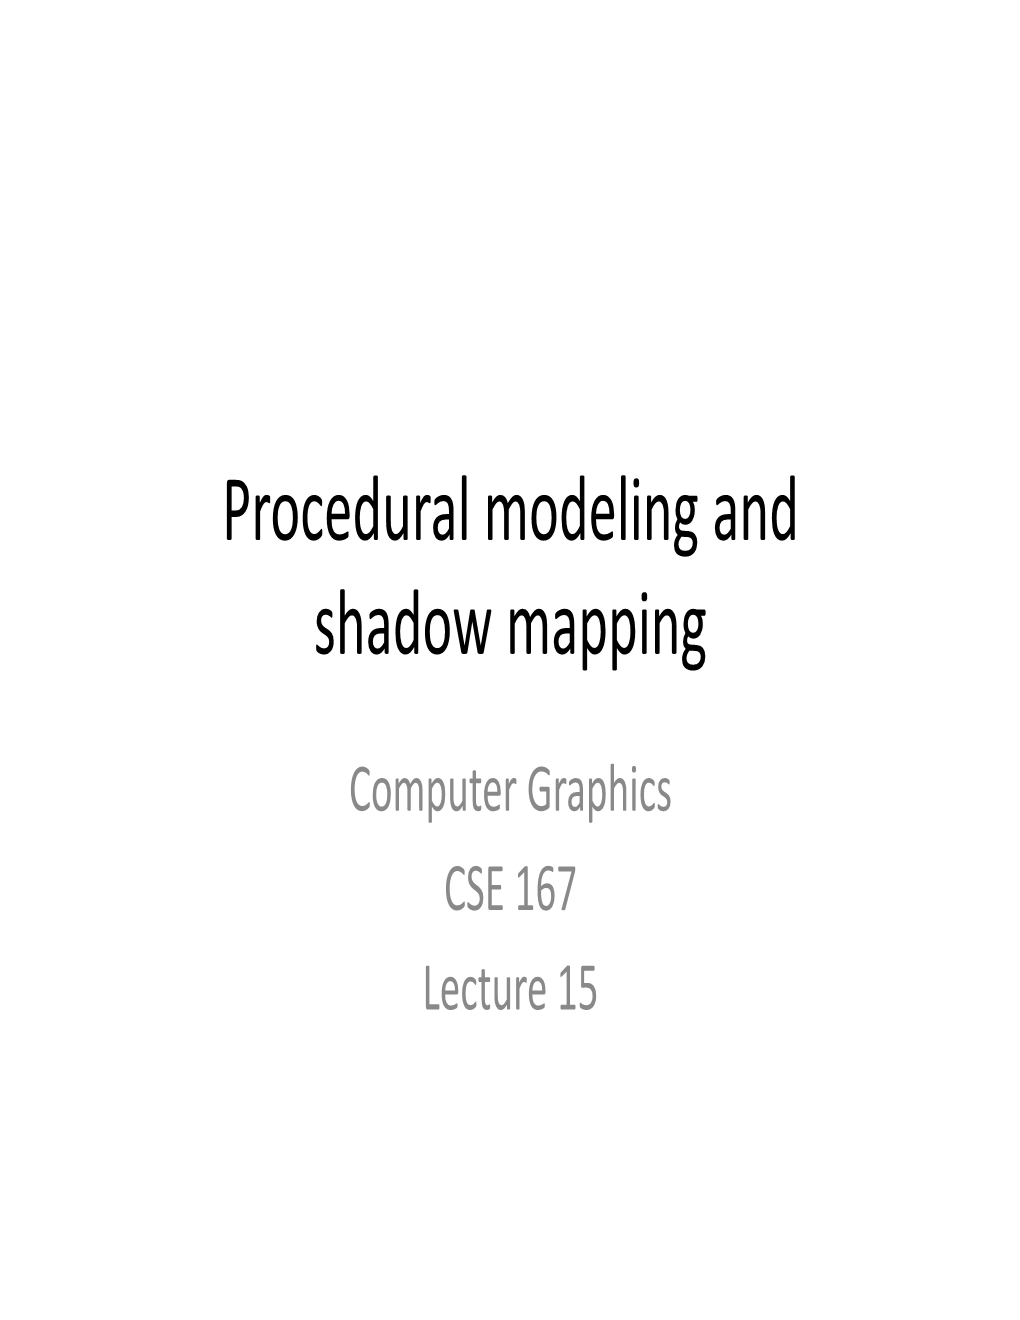 Procedural Modeling and Shadow Mapping